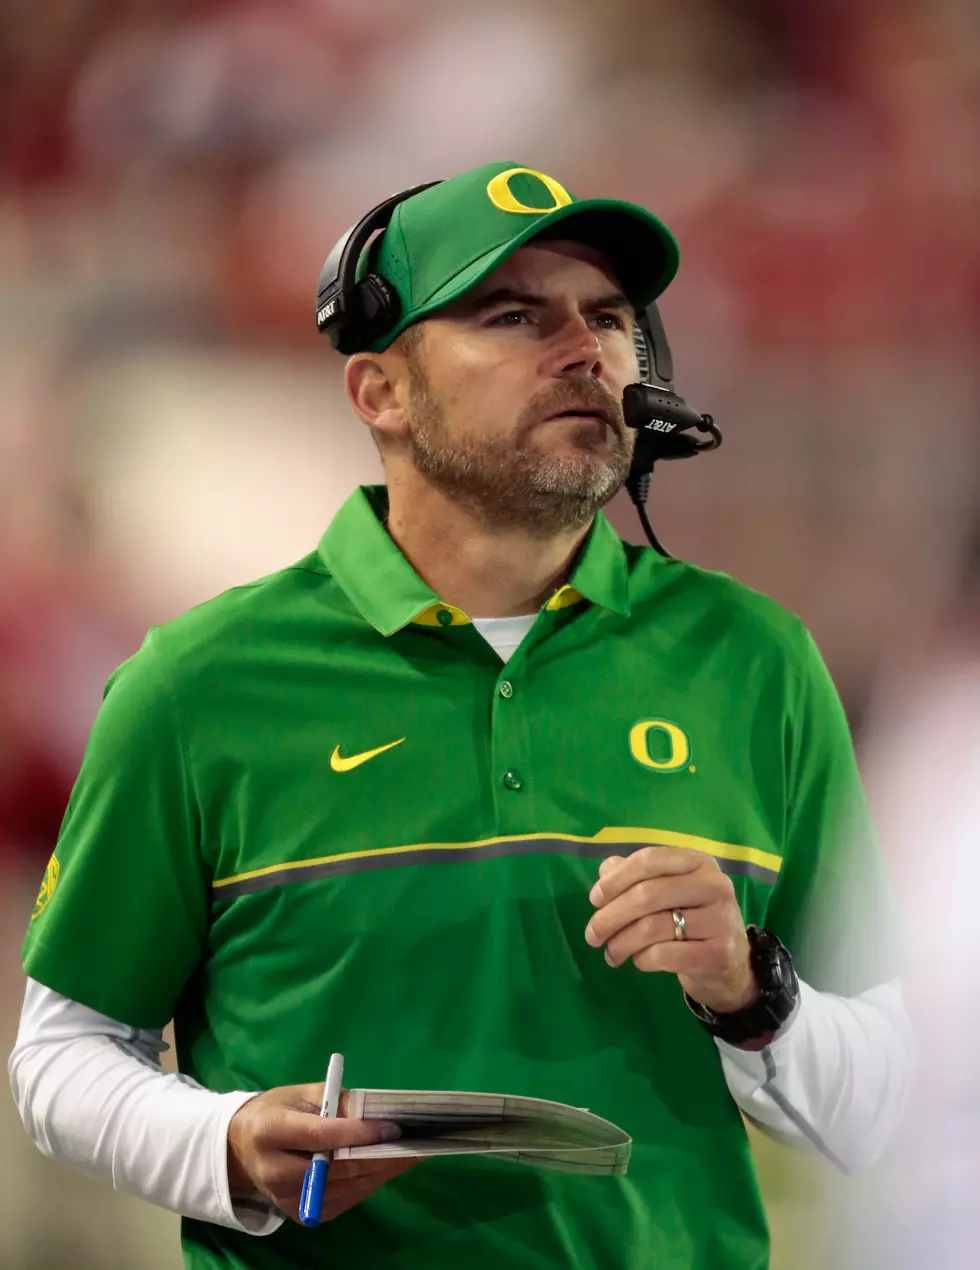 Coach Suggests Oregon’s Herbert and Prukop is Competing for Start